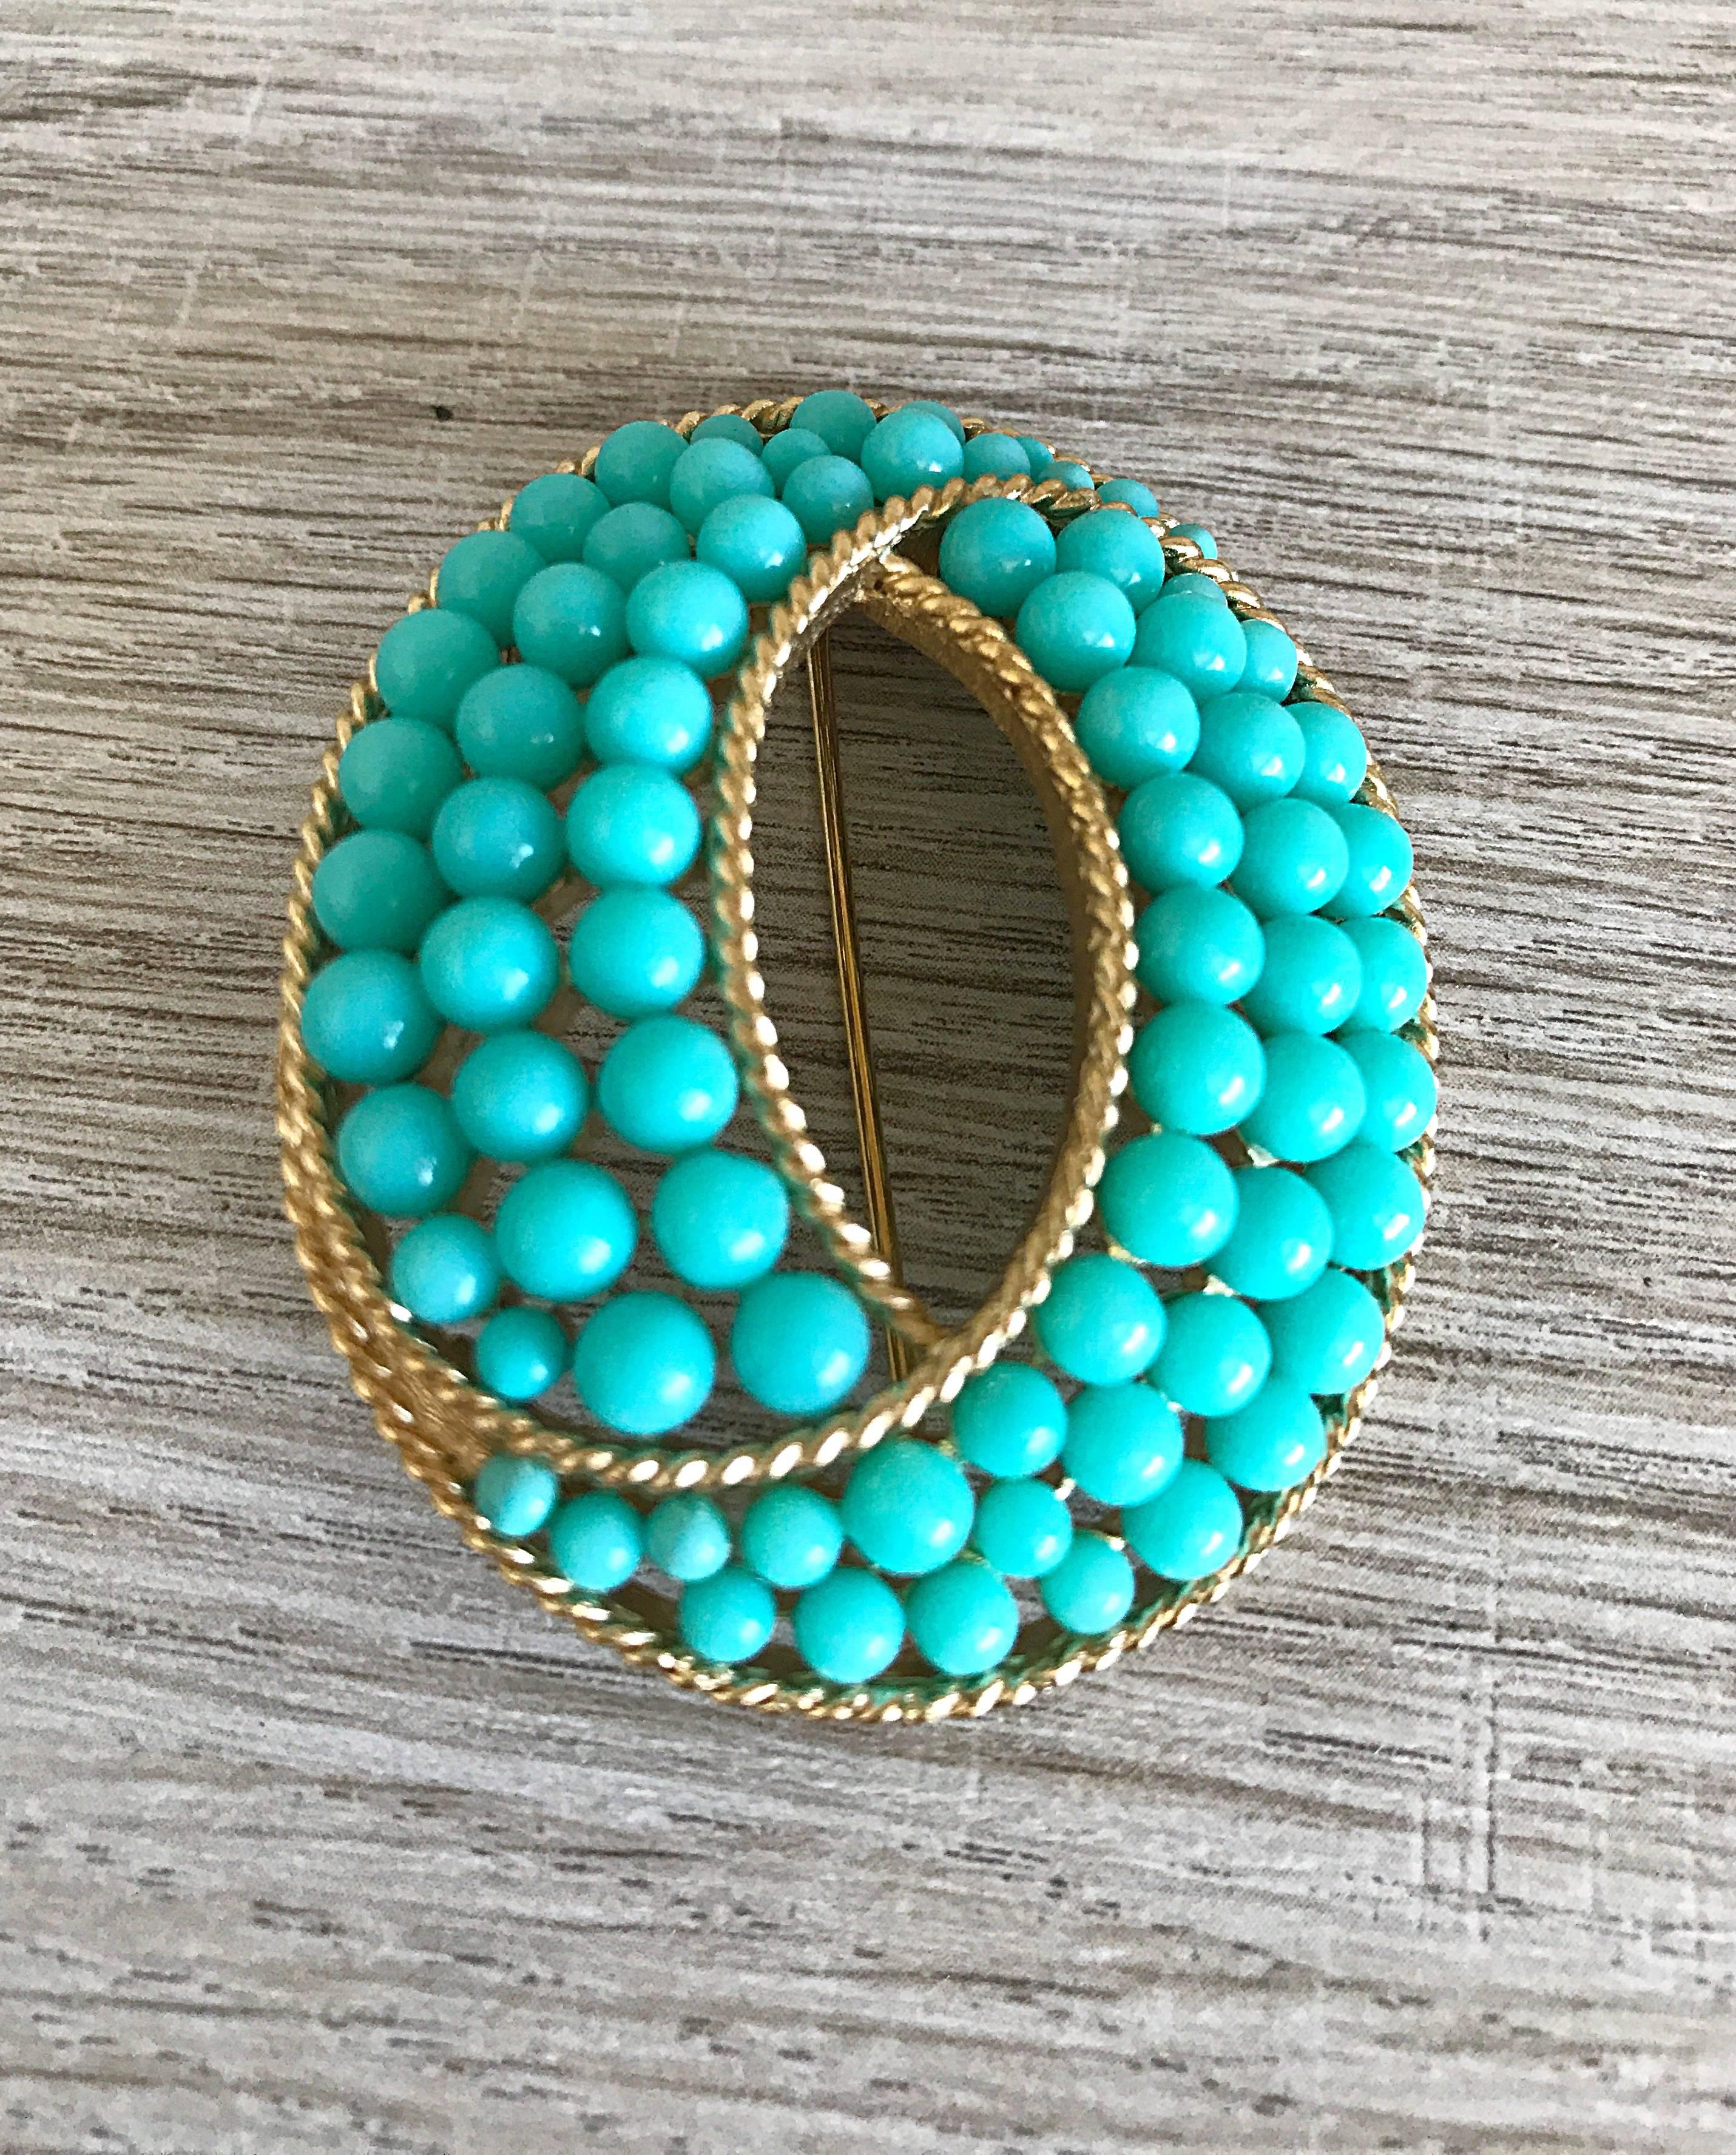 Trifari 1960s Turquoise Blue + Gold Oval 60s Signed Vintage Ball Brooch Pin 3